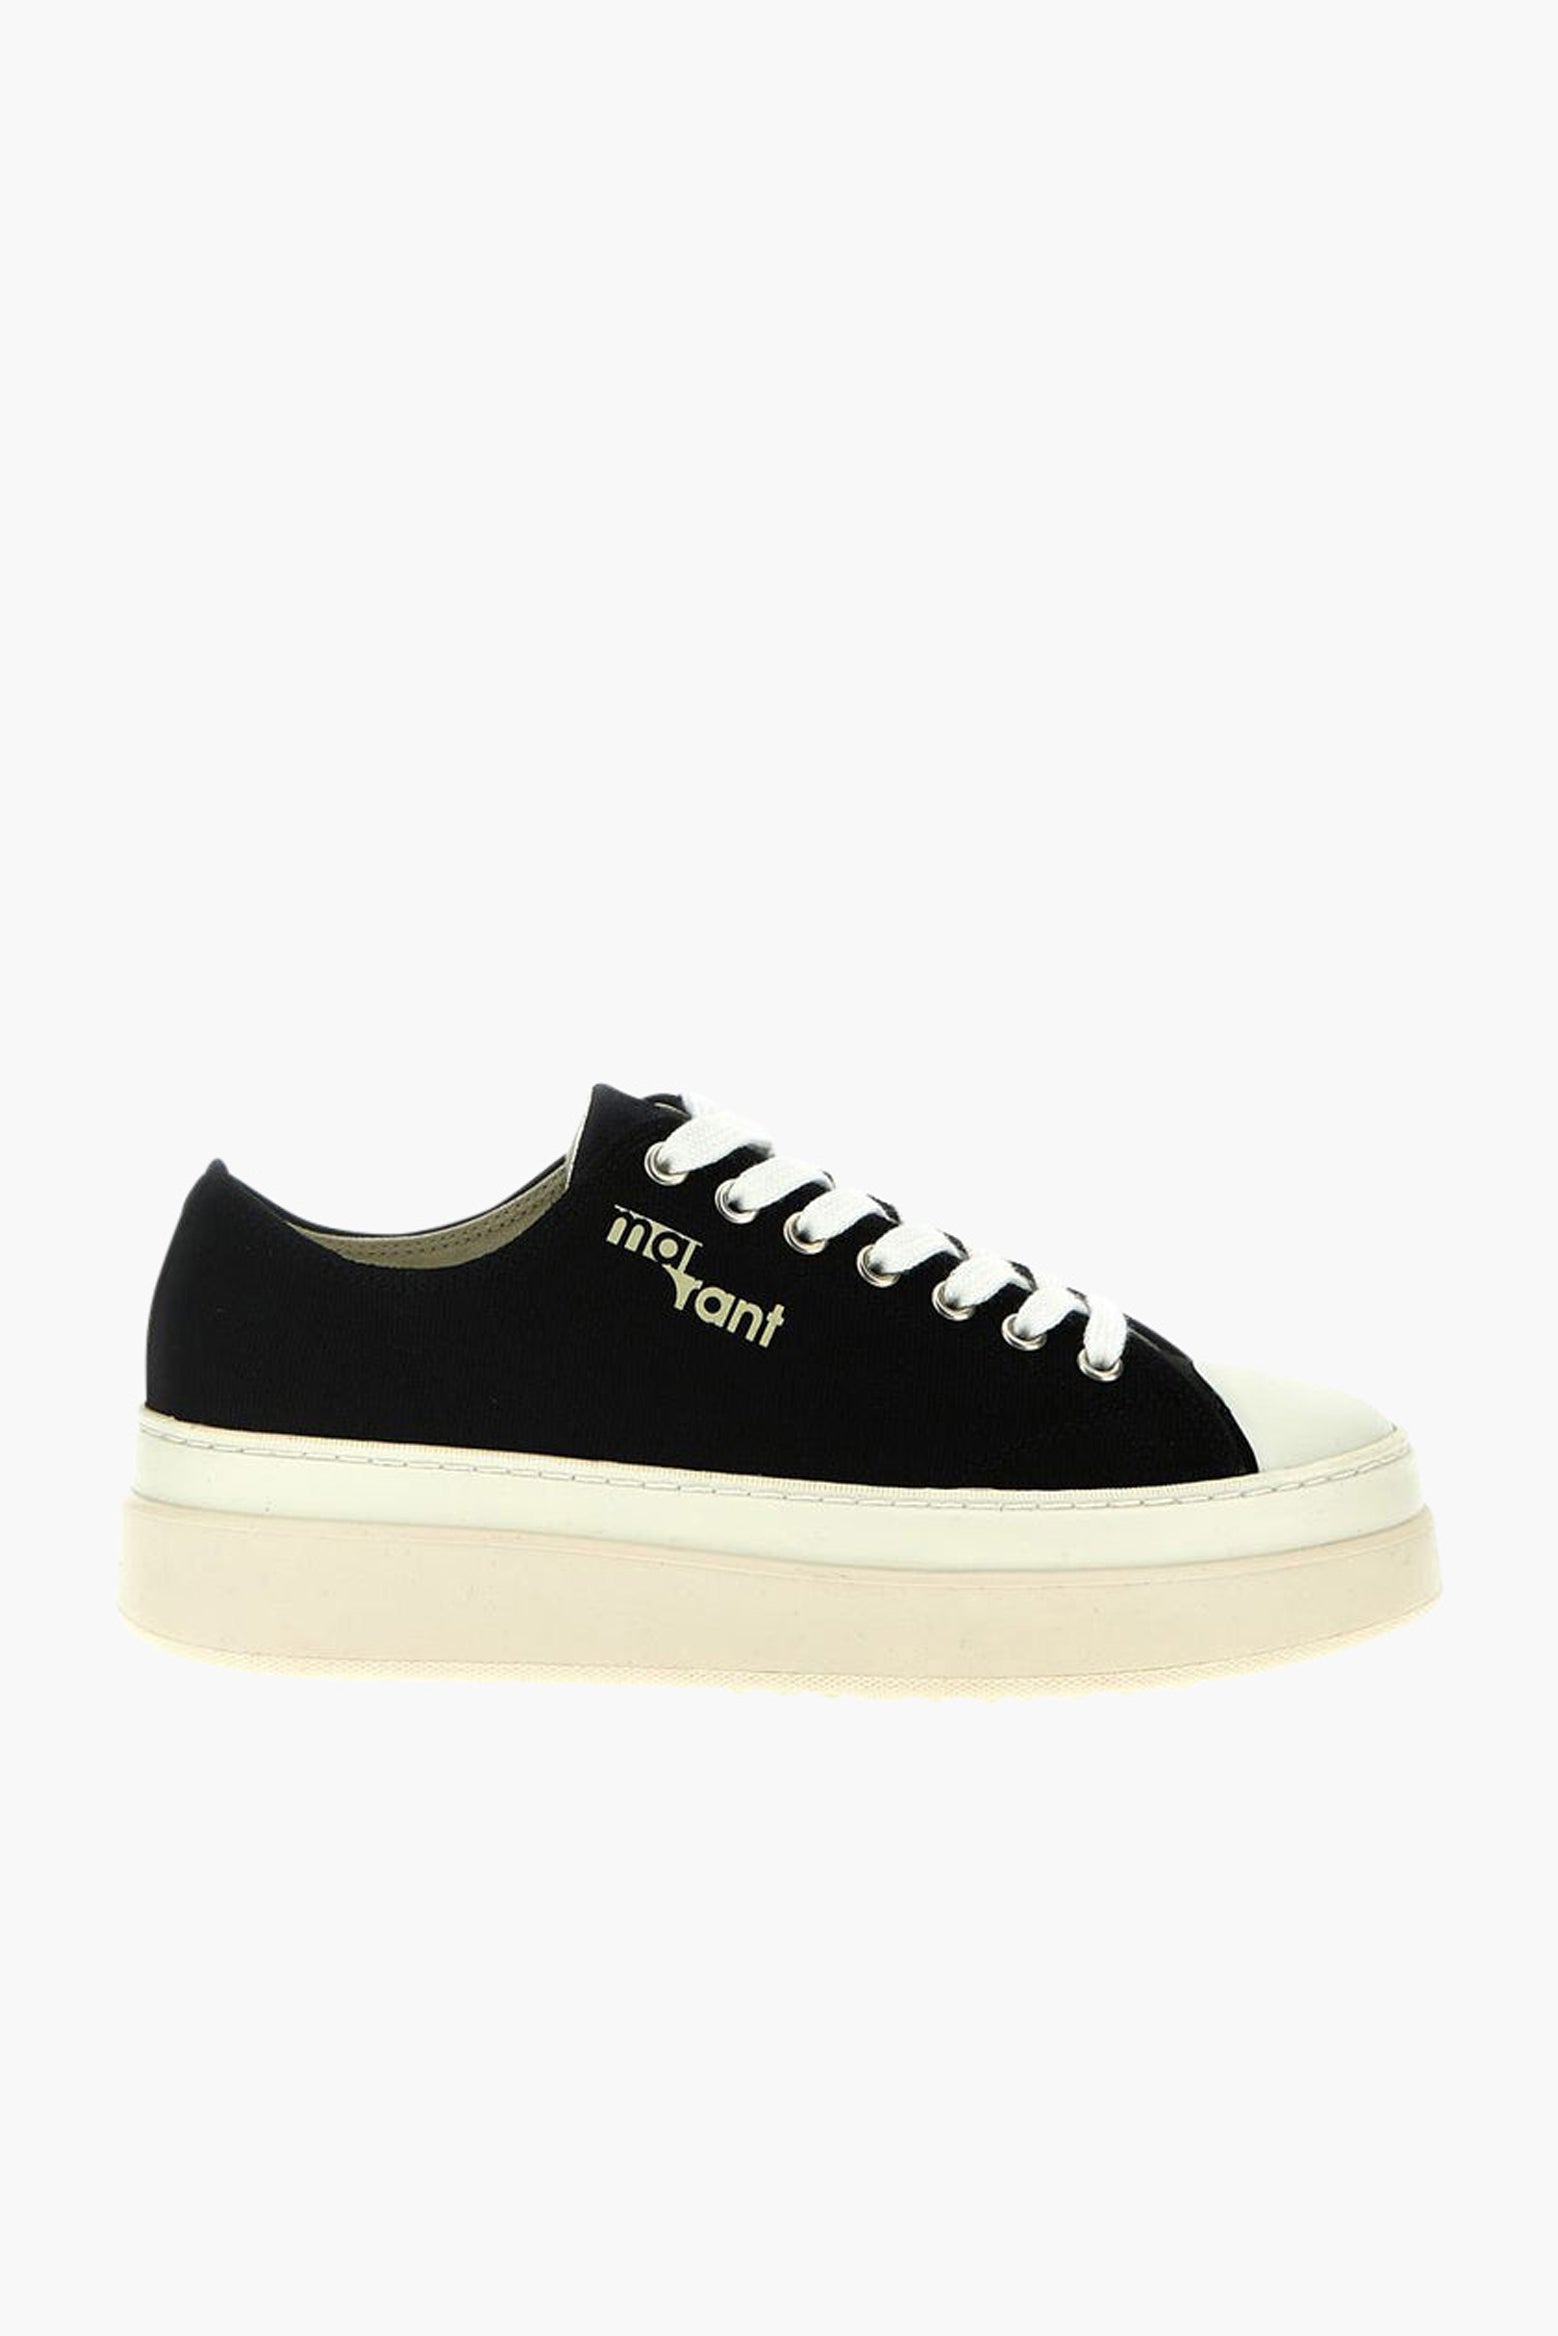 The Isabel Marant Austen Low Sneaker in Black Available at The New Trend Australia.